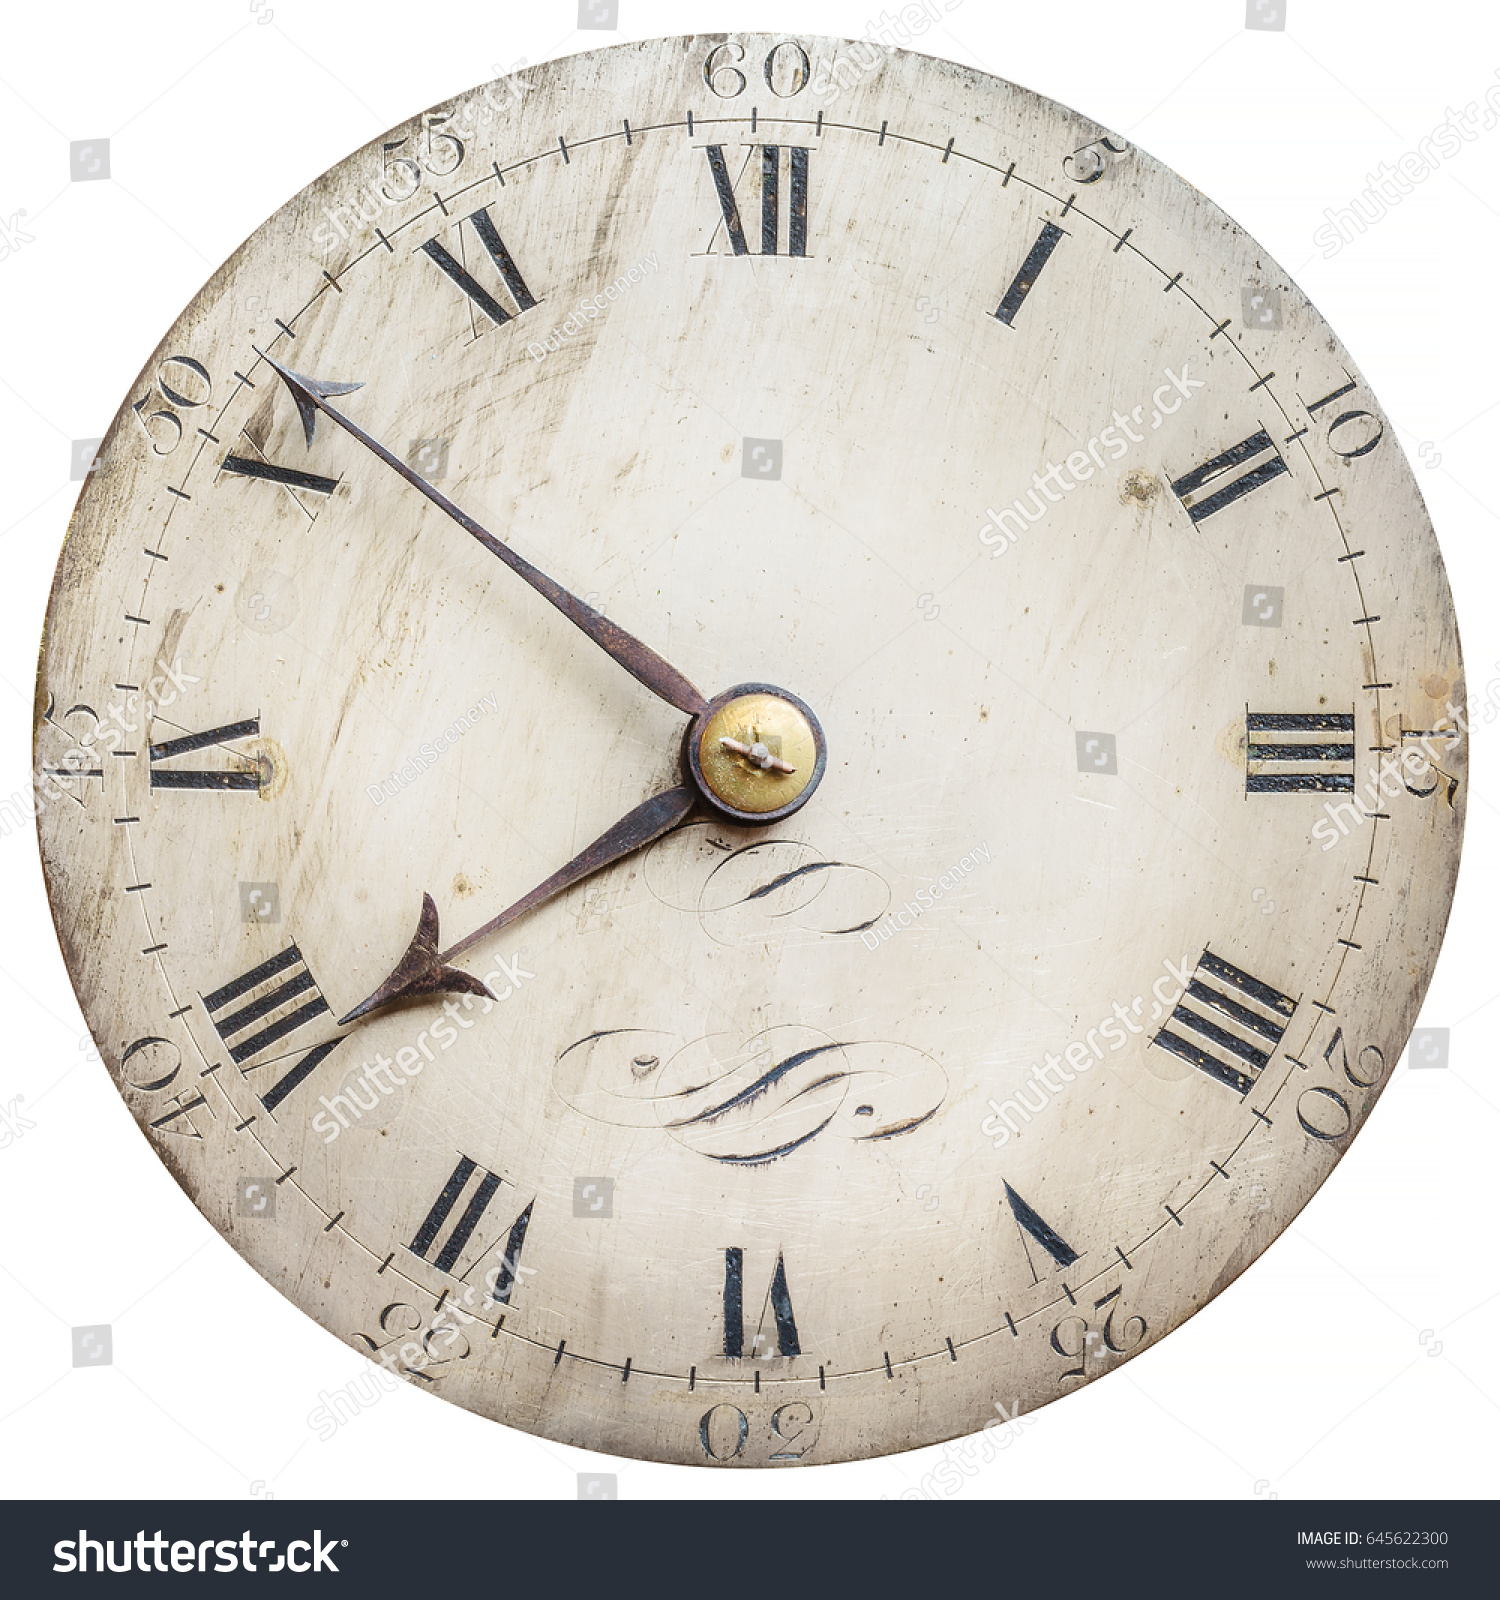 Sepia Toned Image Old Clock Face Stock Photo (Royalty Free ...